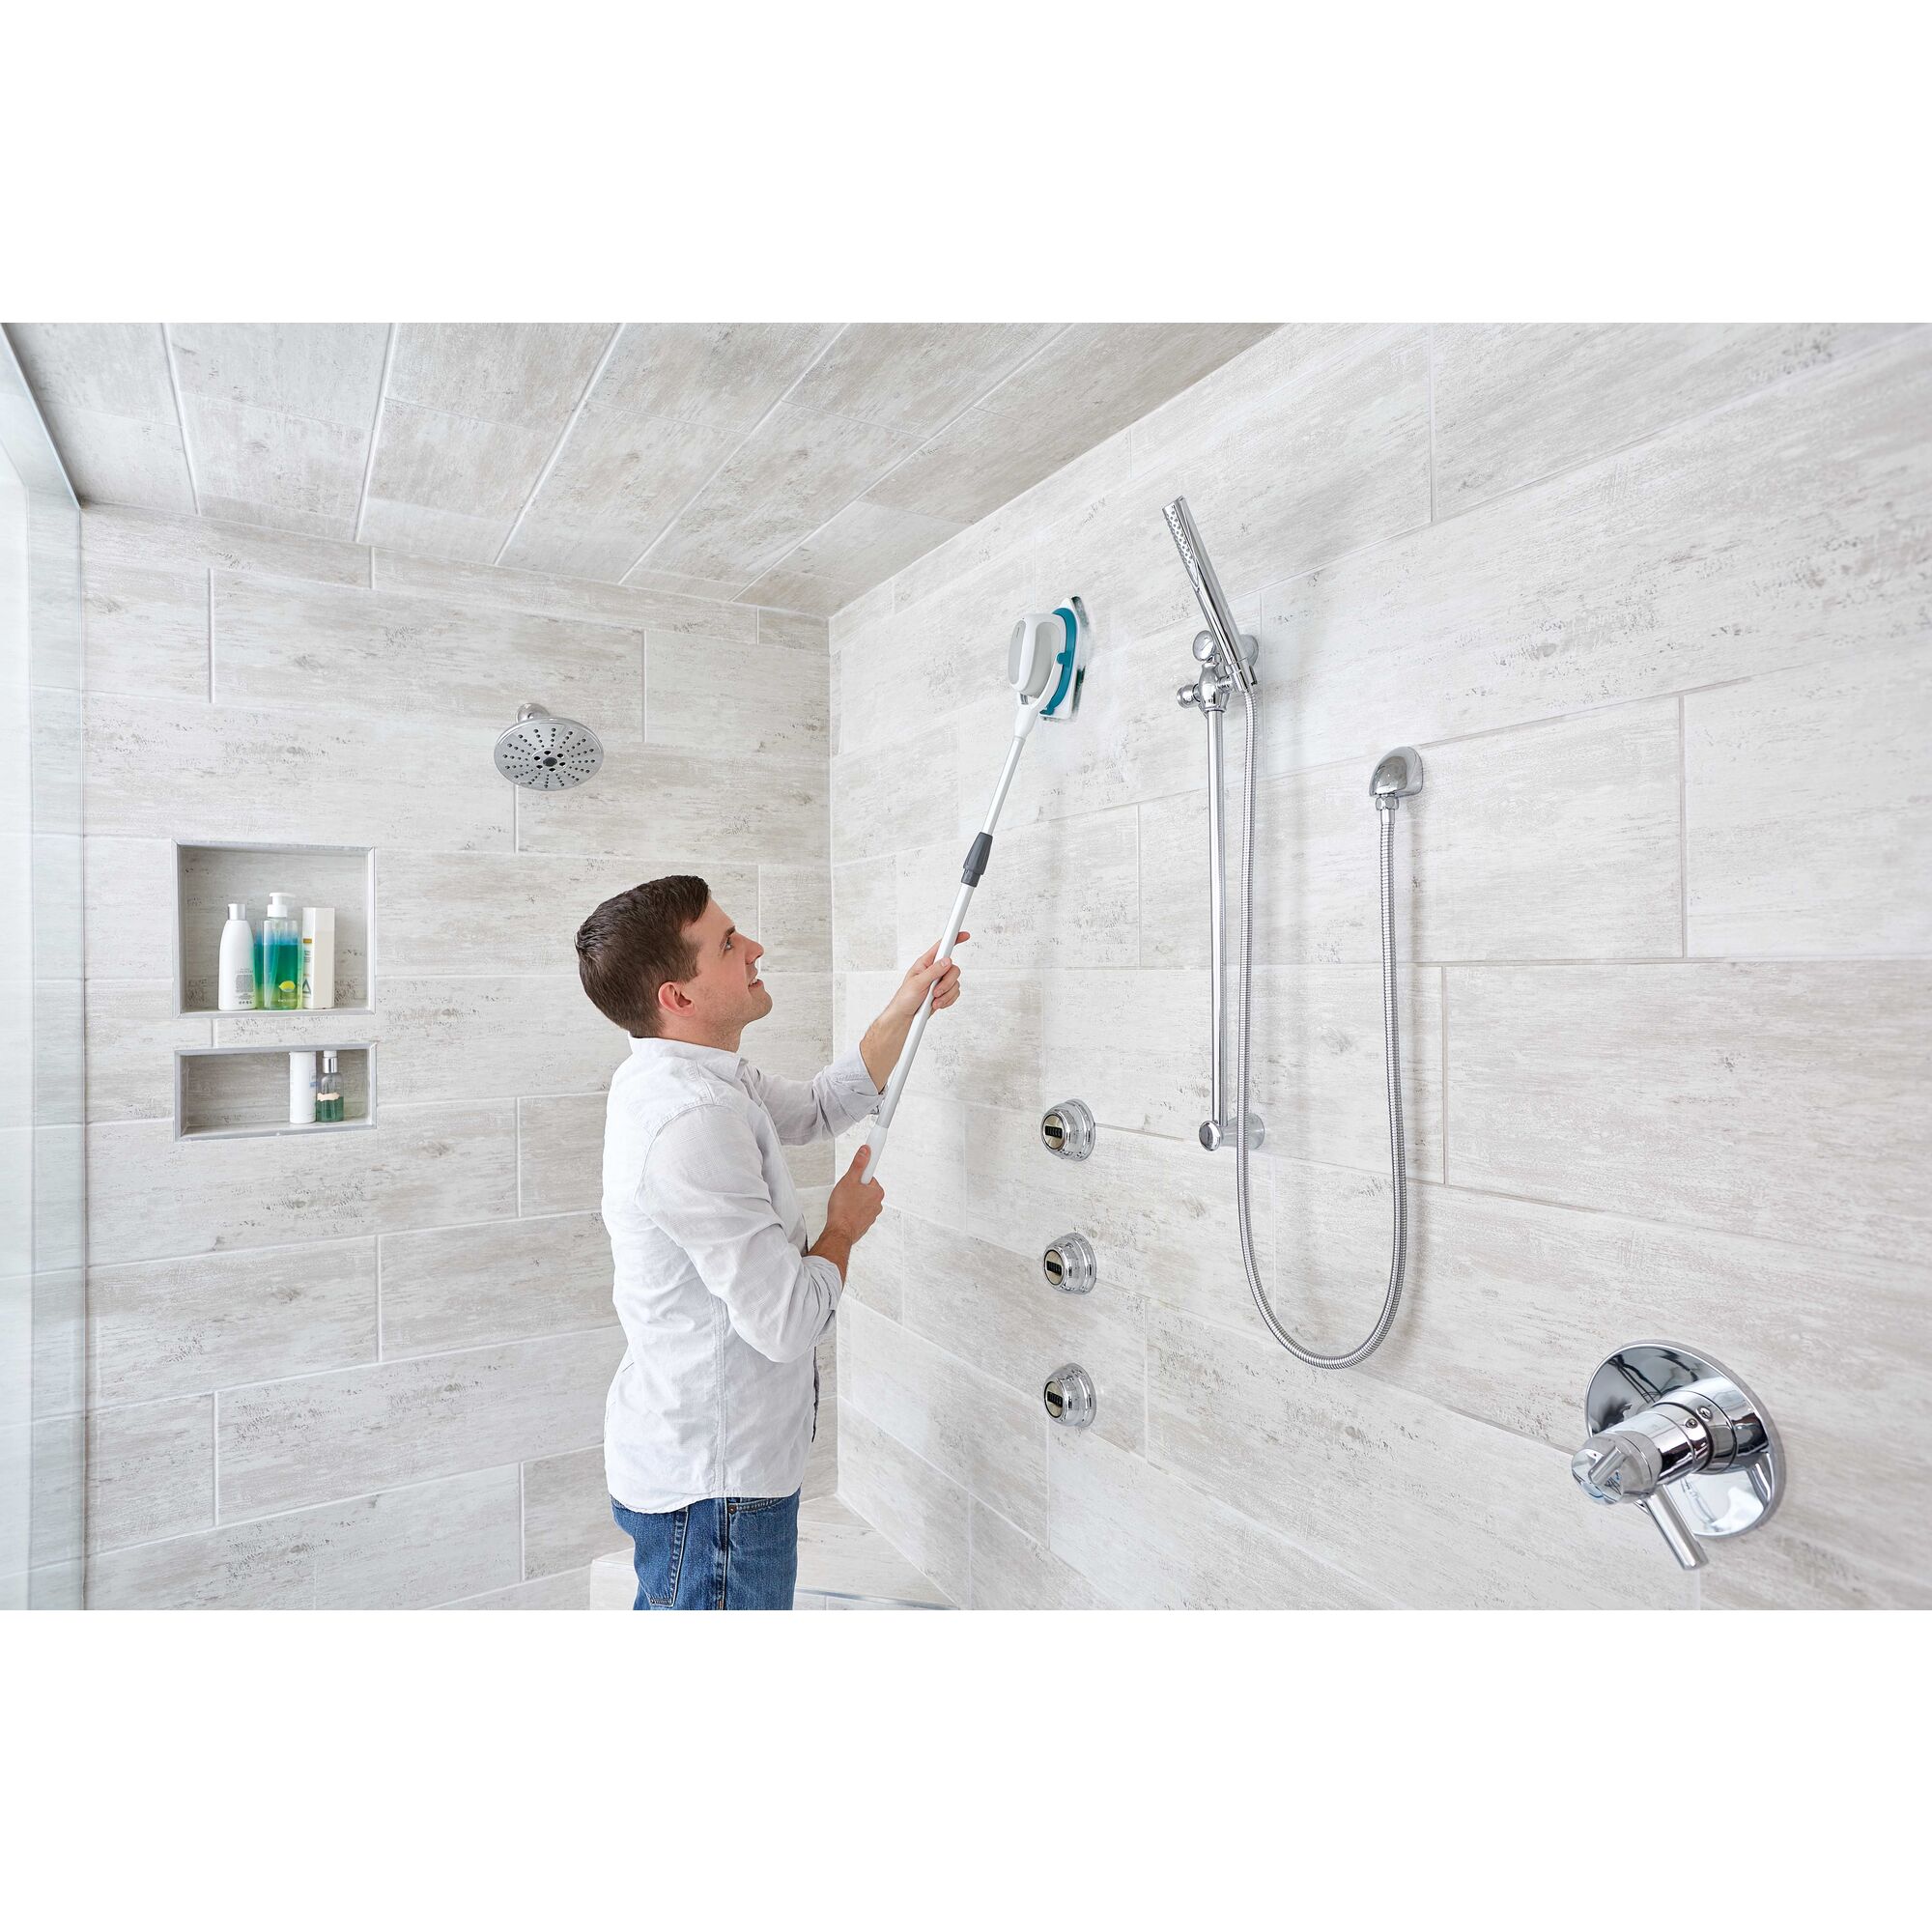 Scumbuster Pro Rechargeable Powered Scrubber with Extension Pole being used for cleaning shower walls.